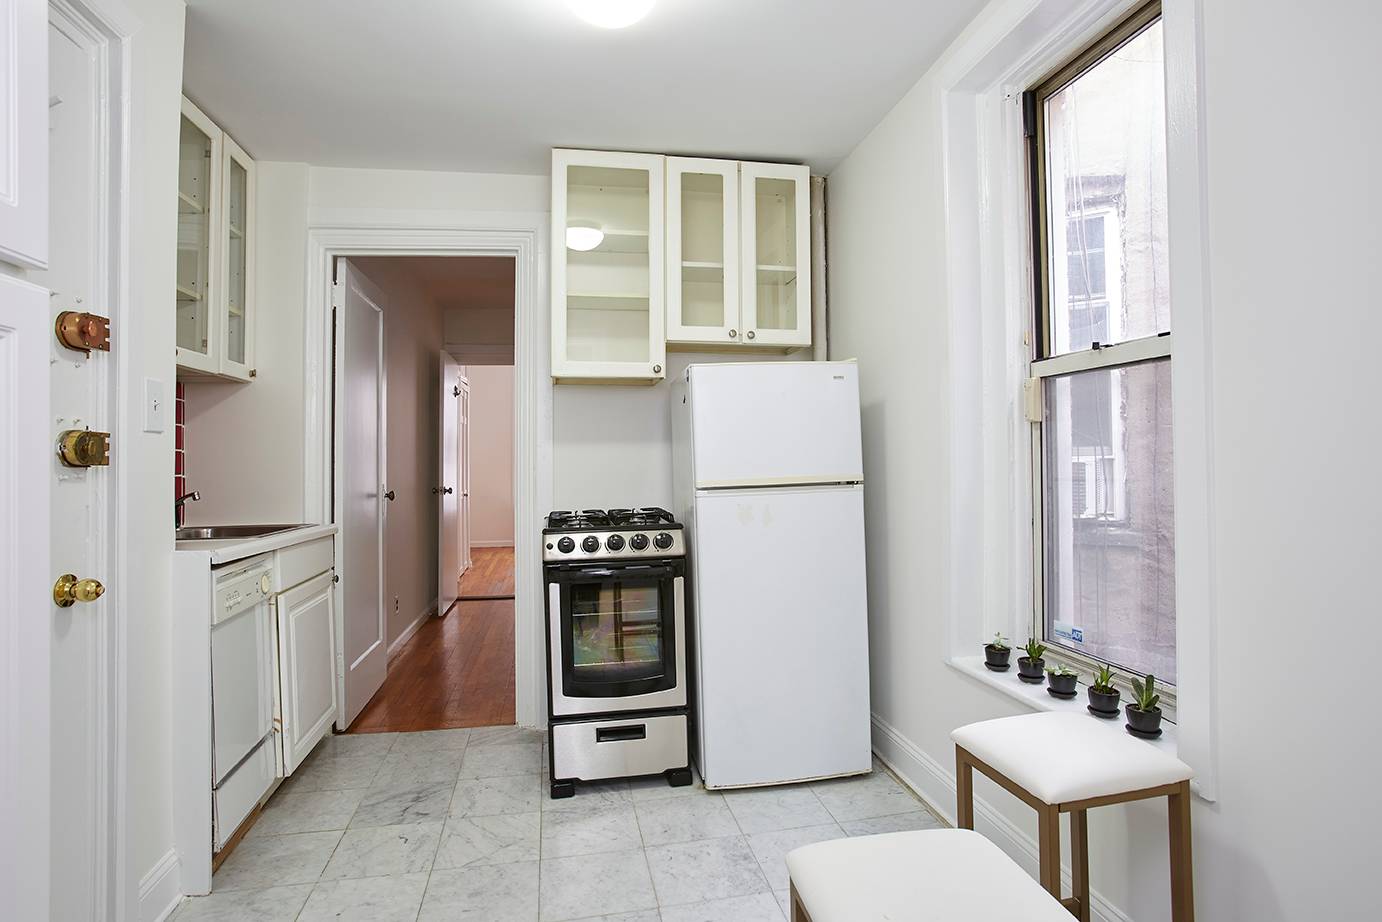 Top floor 5th one bedroom apartment with the space you need in an excellent location !